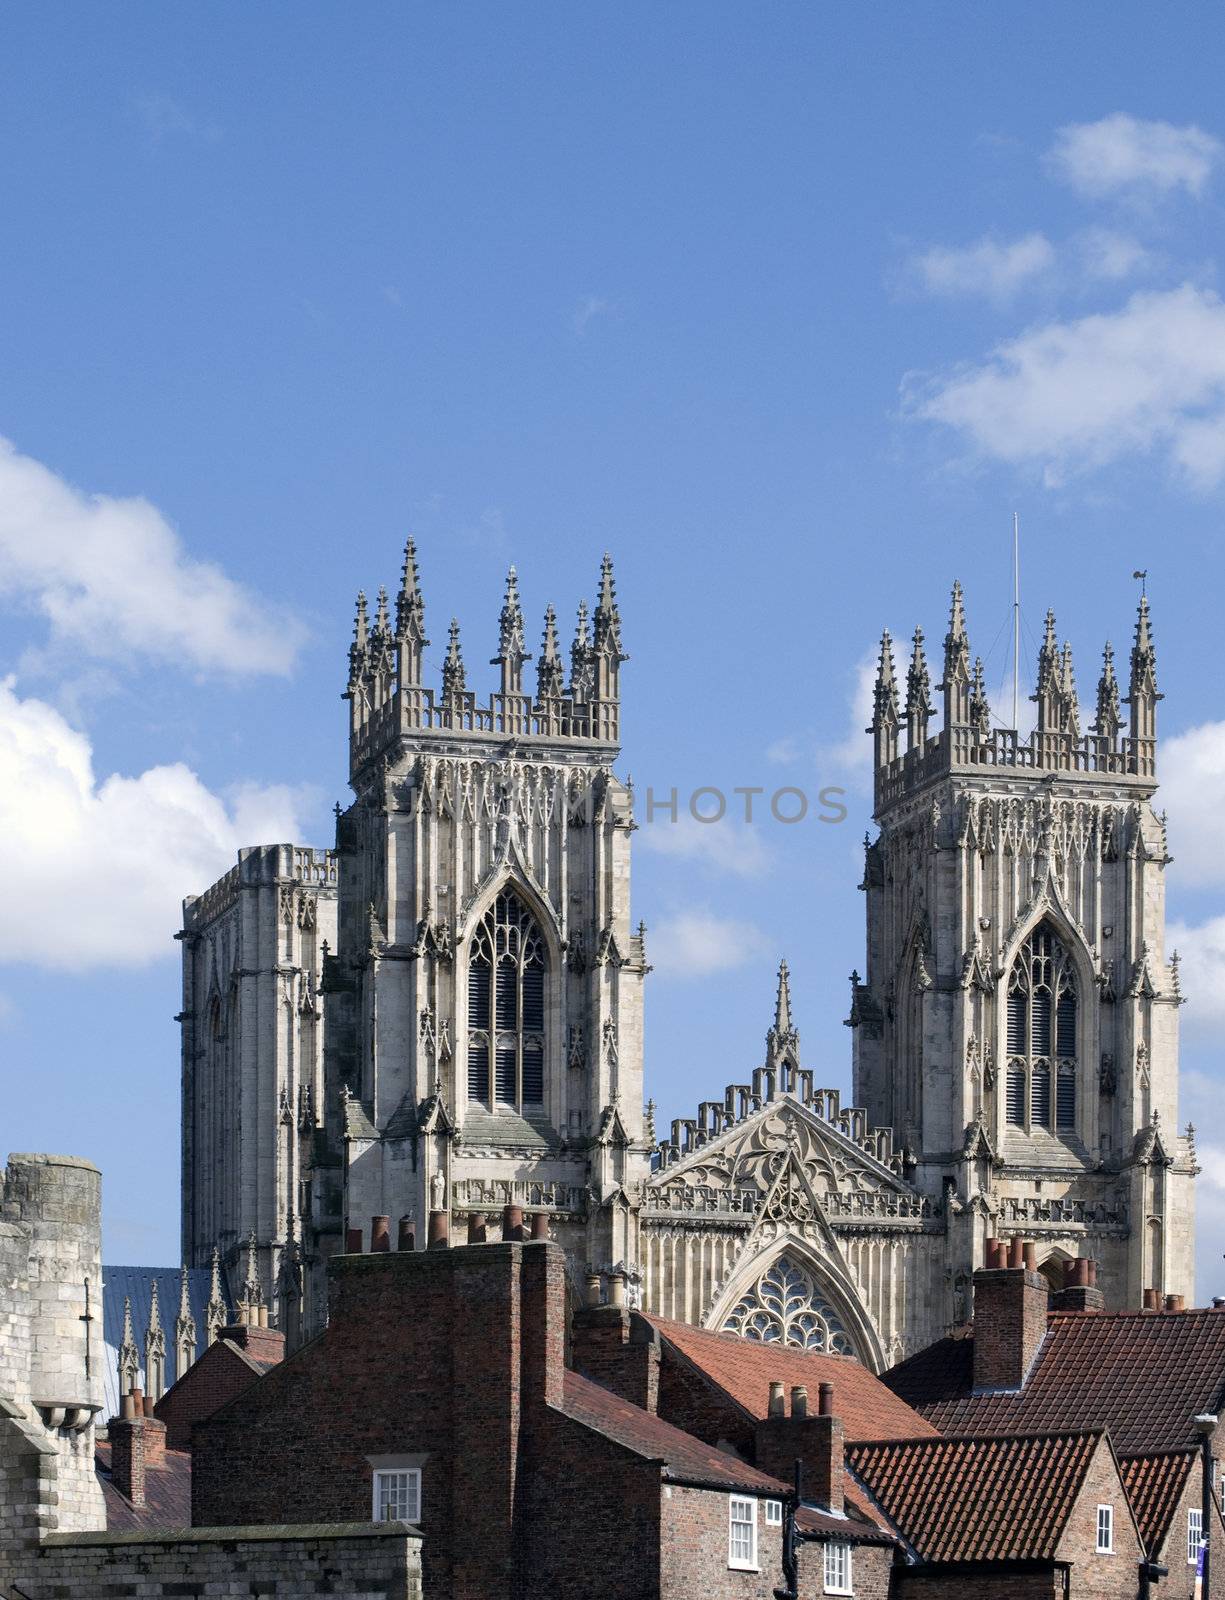 View of York Minster with houses in foreground